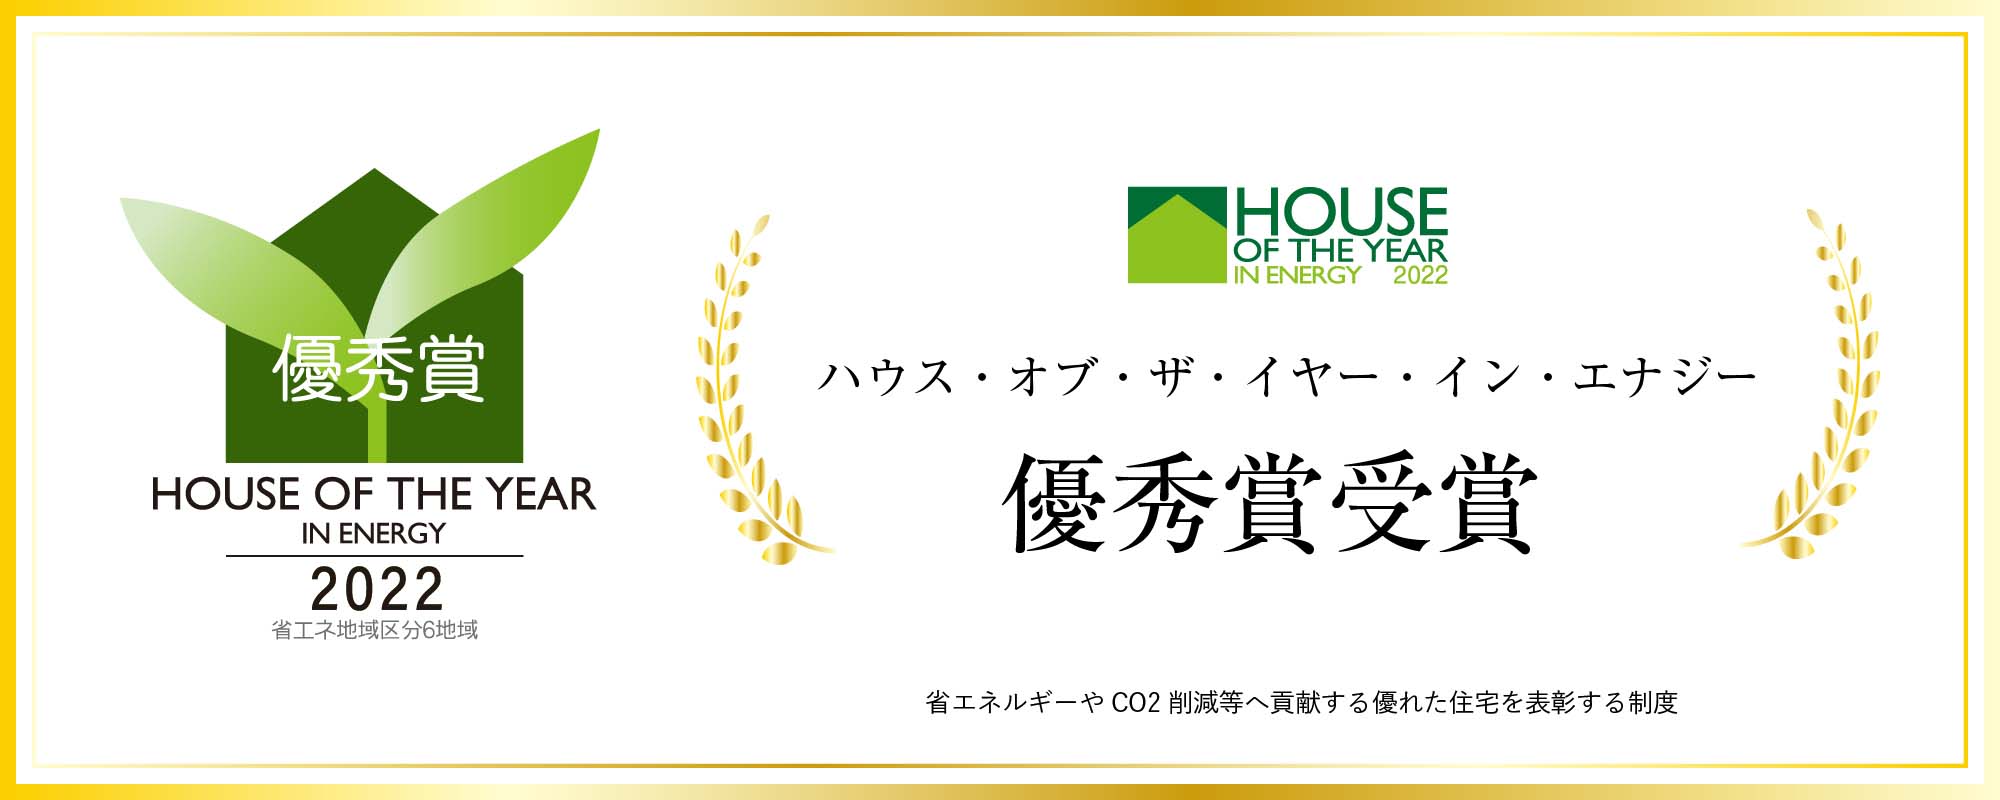 HOUSE OF THE YEAR2022・優秀賞「省エネ地域区分6地域」